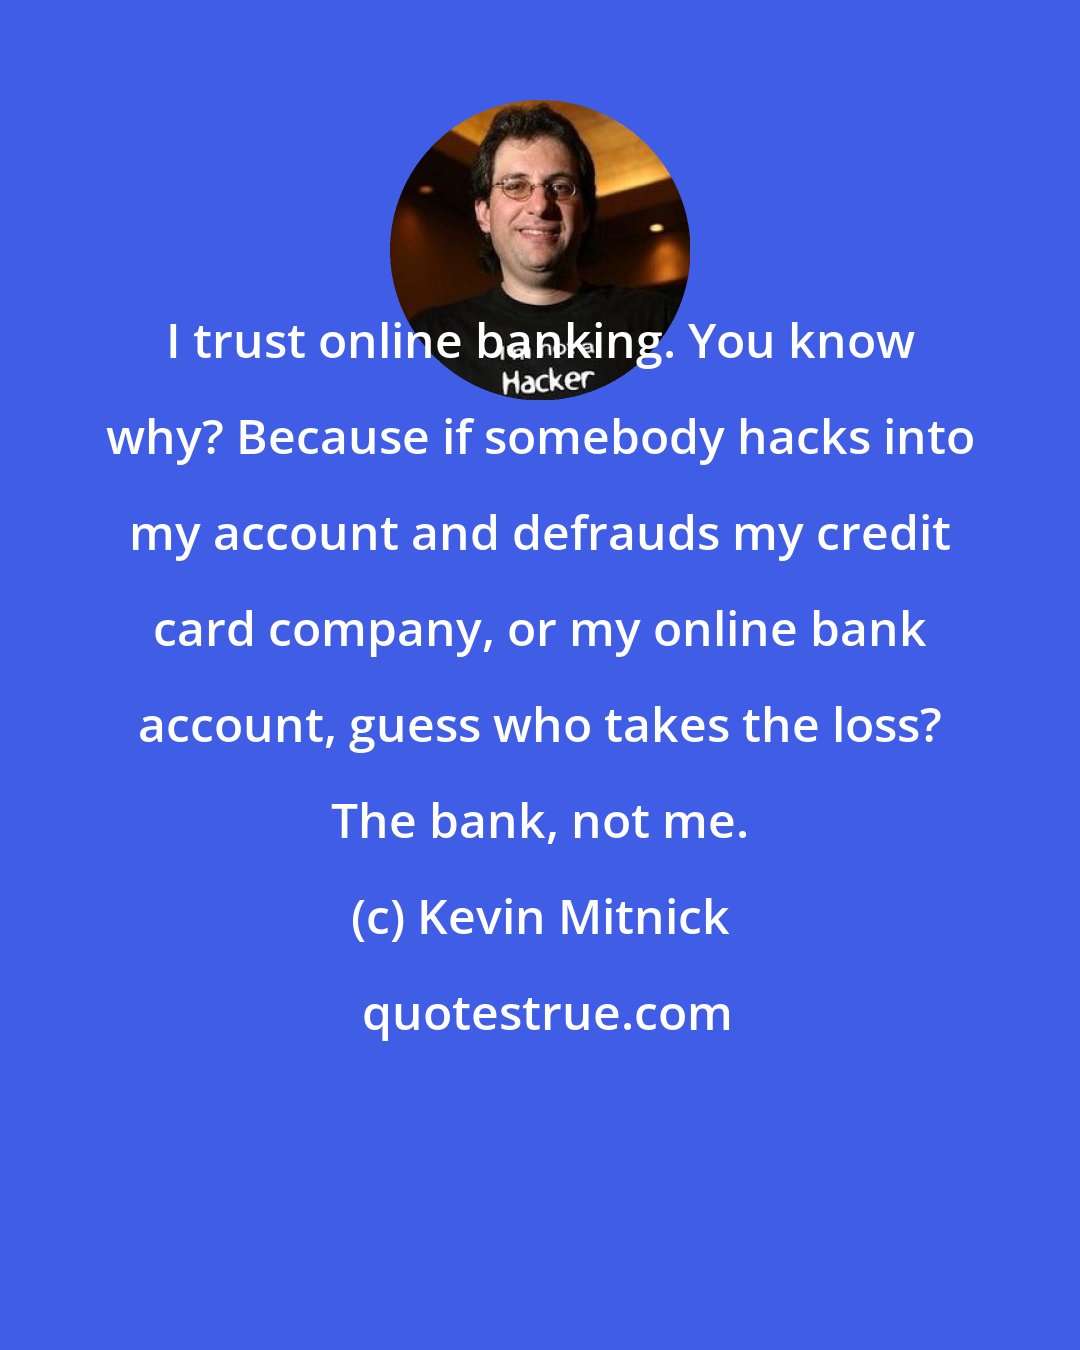 Kevin Mitnick: I trust online banking. You know why? Because if somebody hacks into my account and defrauds my credit card company, or my online bank account, guess who takes the loss? The bank, not me.